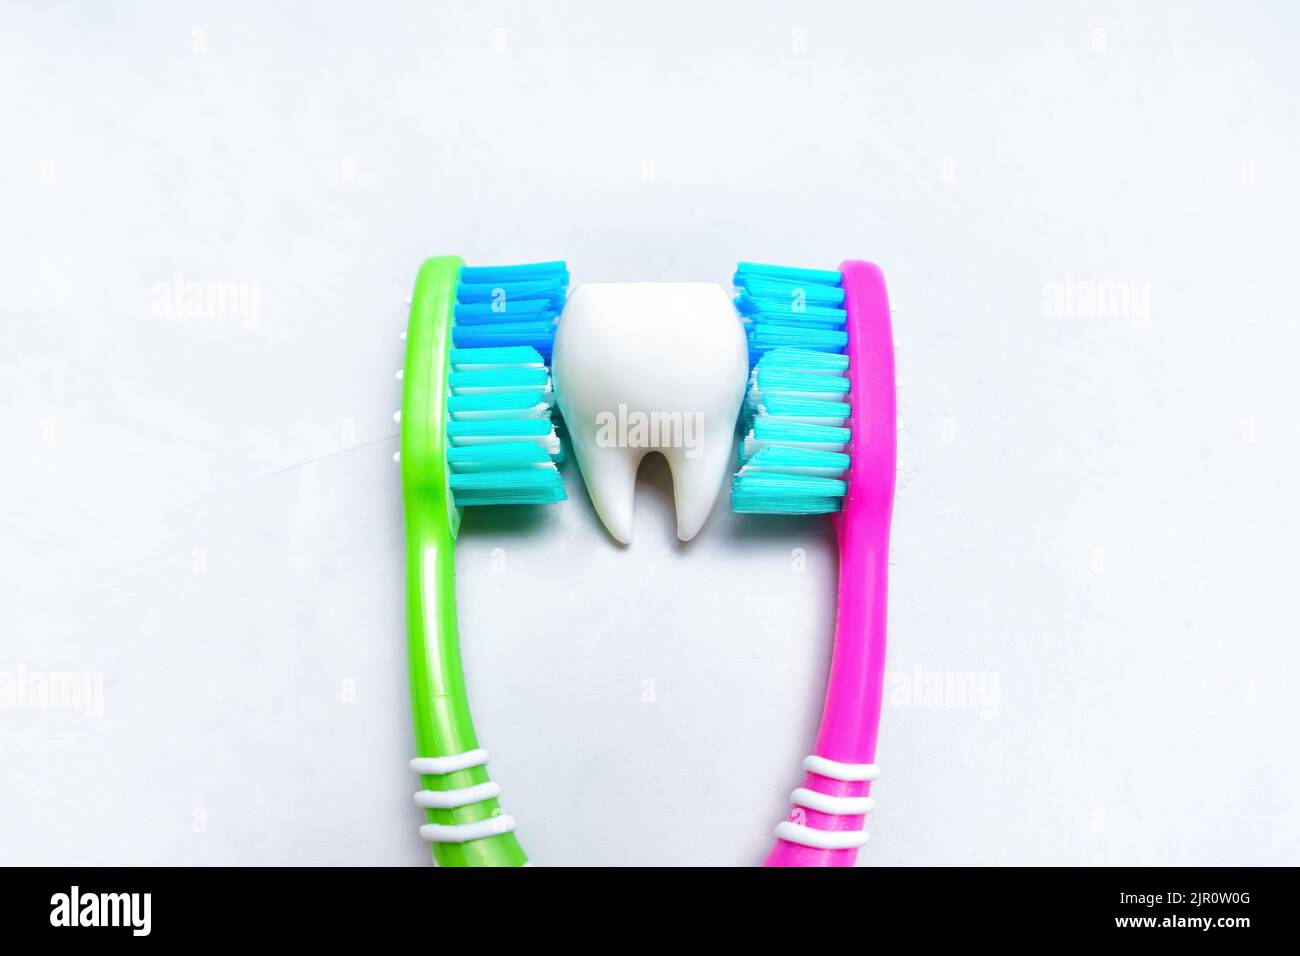 Large white tooth between two colorful toothbrushes isolated on a gray background. Daily dental hygiene routine concept. Stock Photo